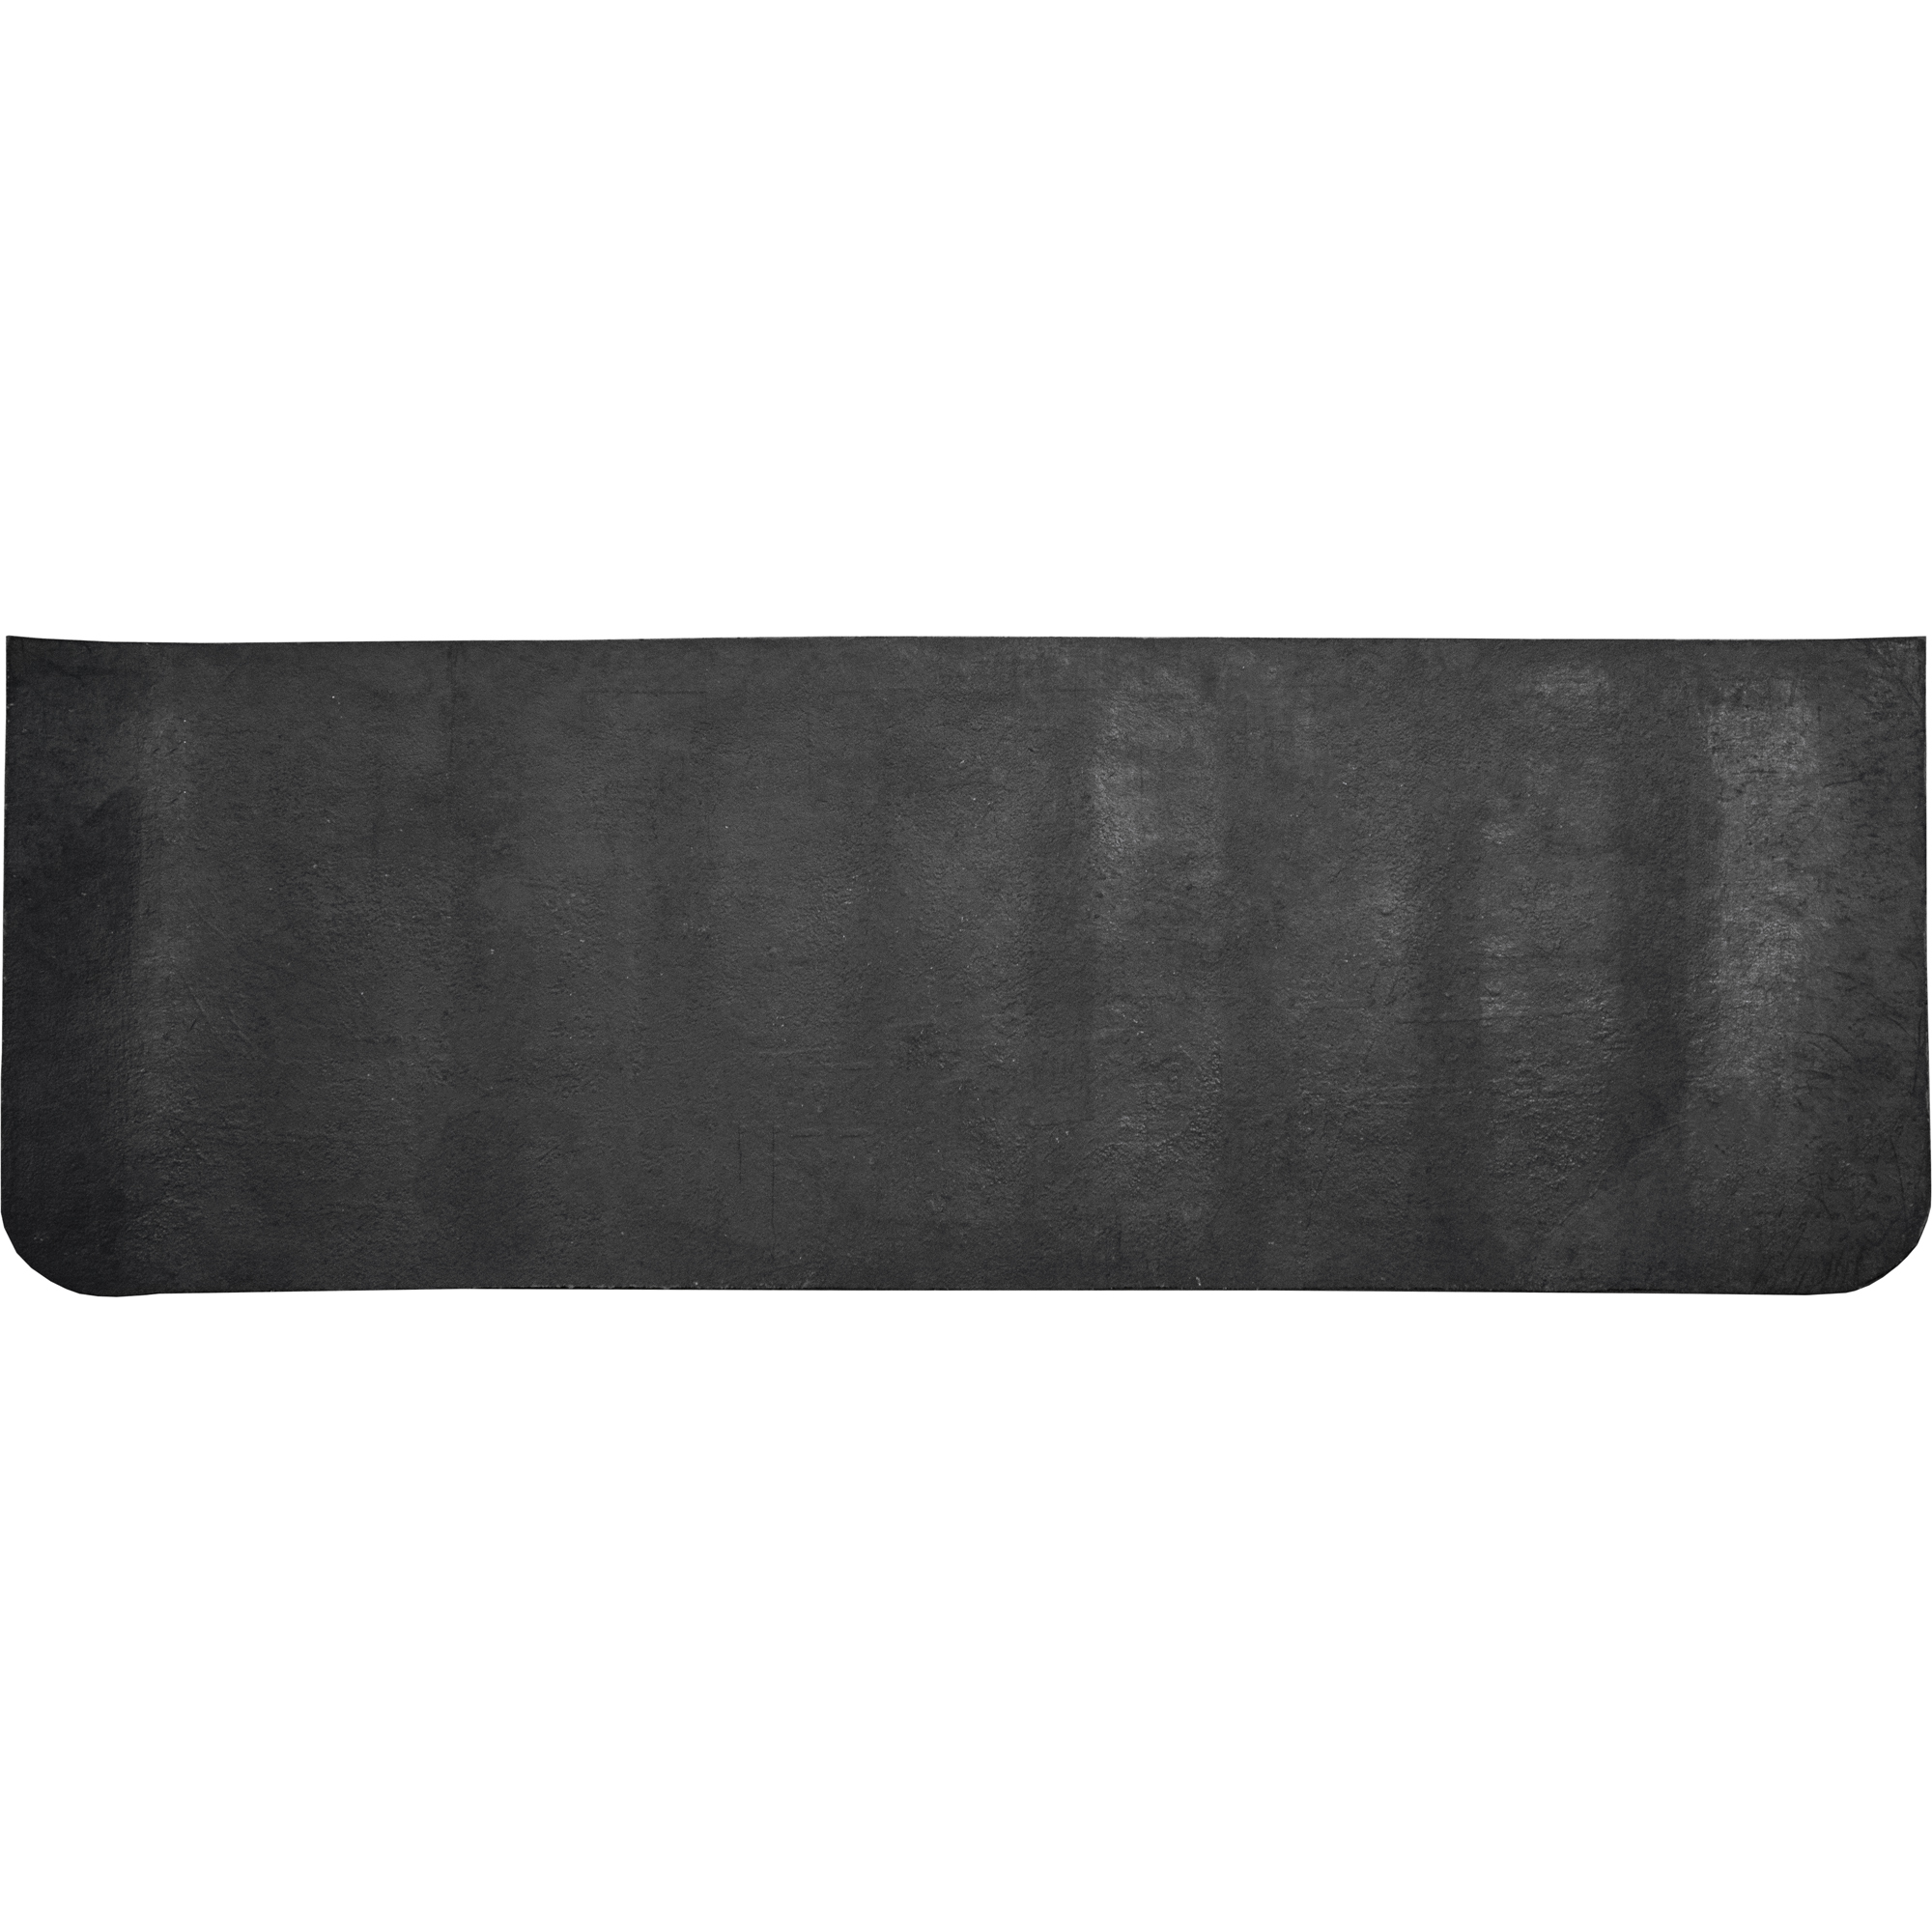 Boomerang Rubber, Ford F-150 Truck Tailgate Mat, Long/Short Bed, Primary Color Black, Model TM F BAGGED